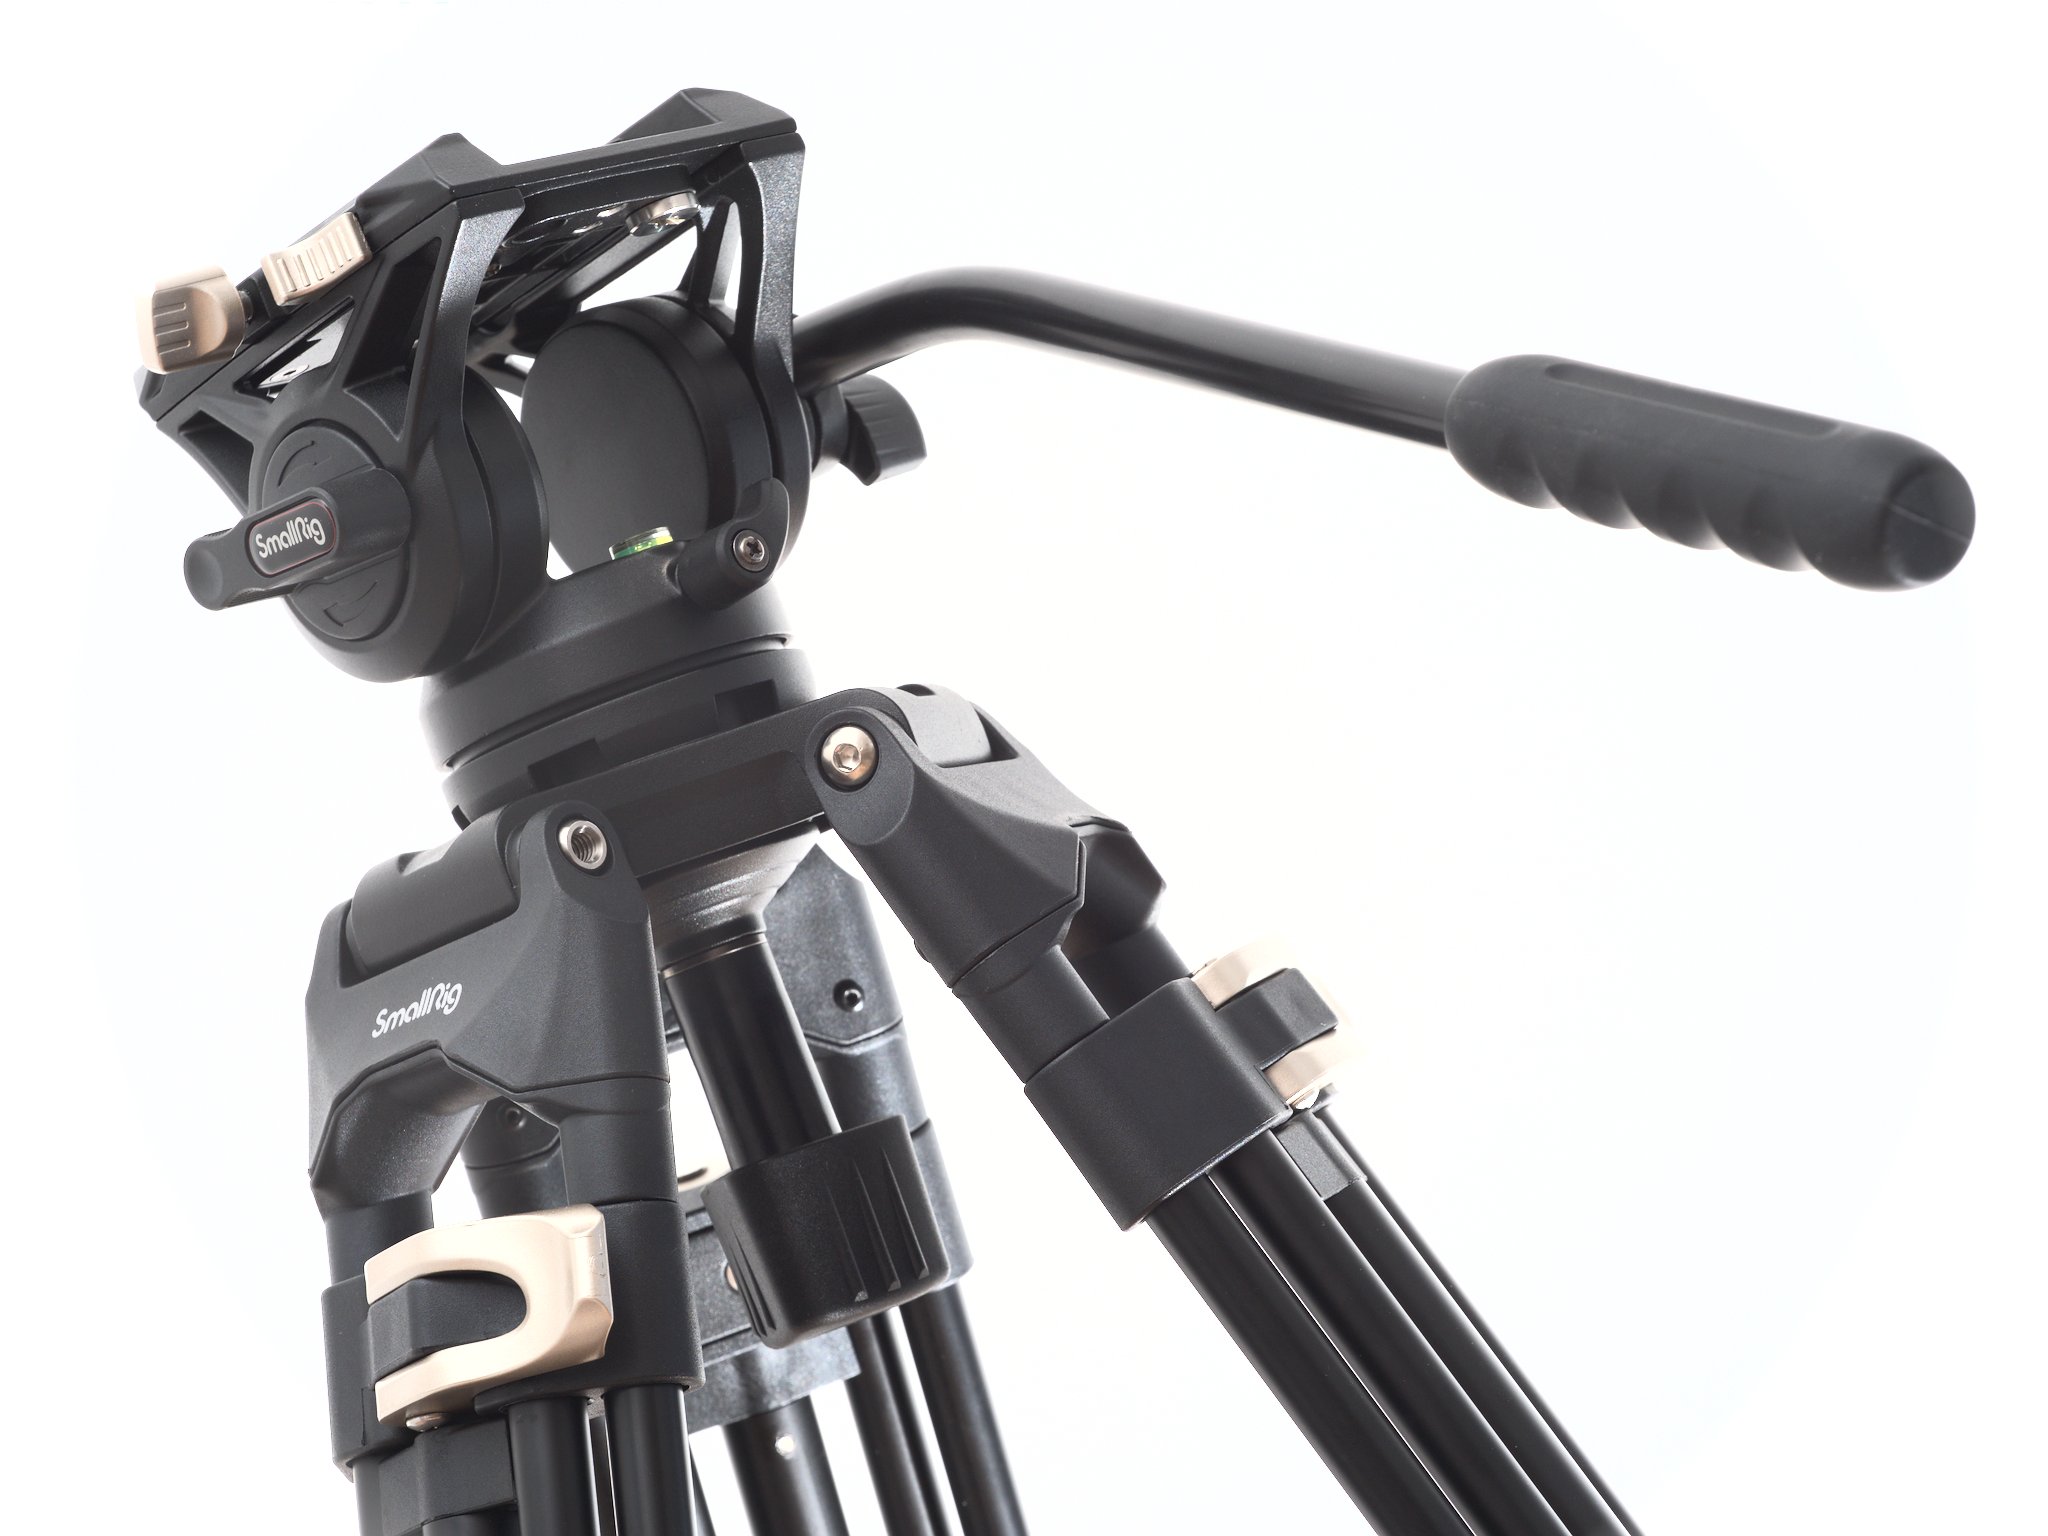 AD-01 Tripod + Fluid Head Review Photography Life